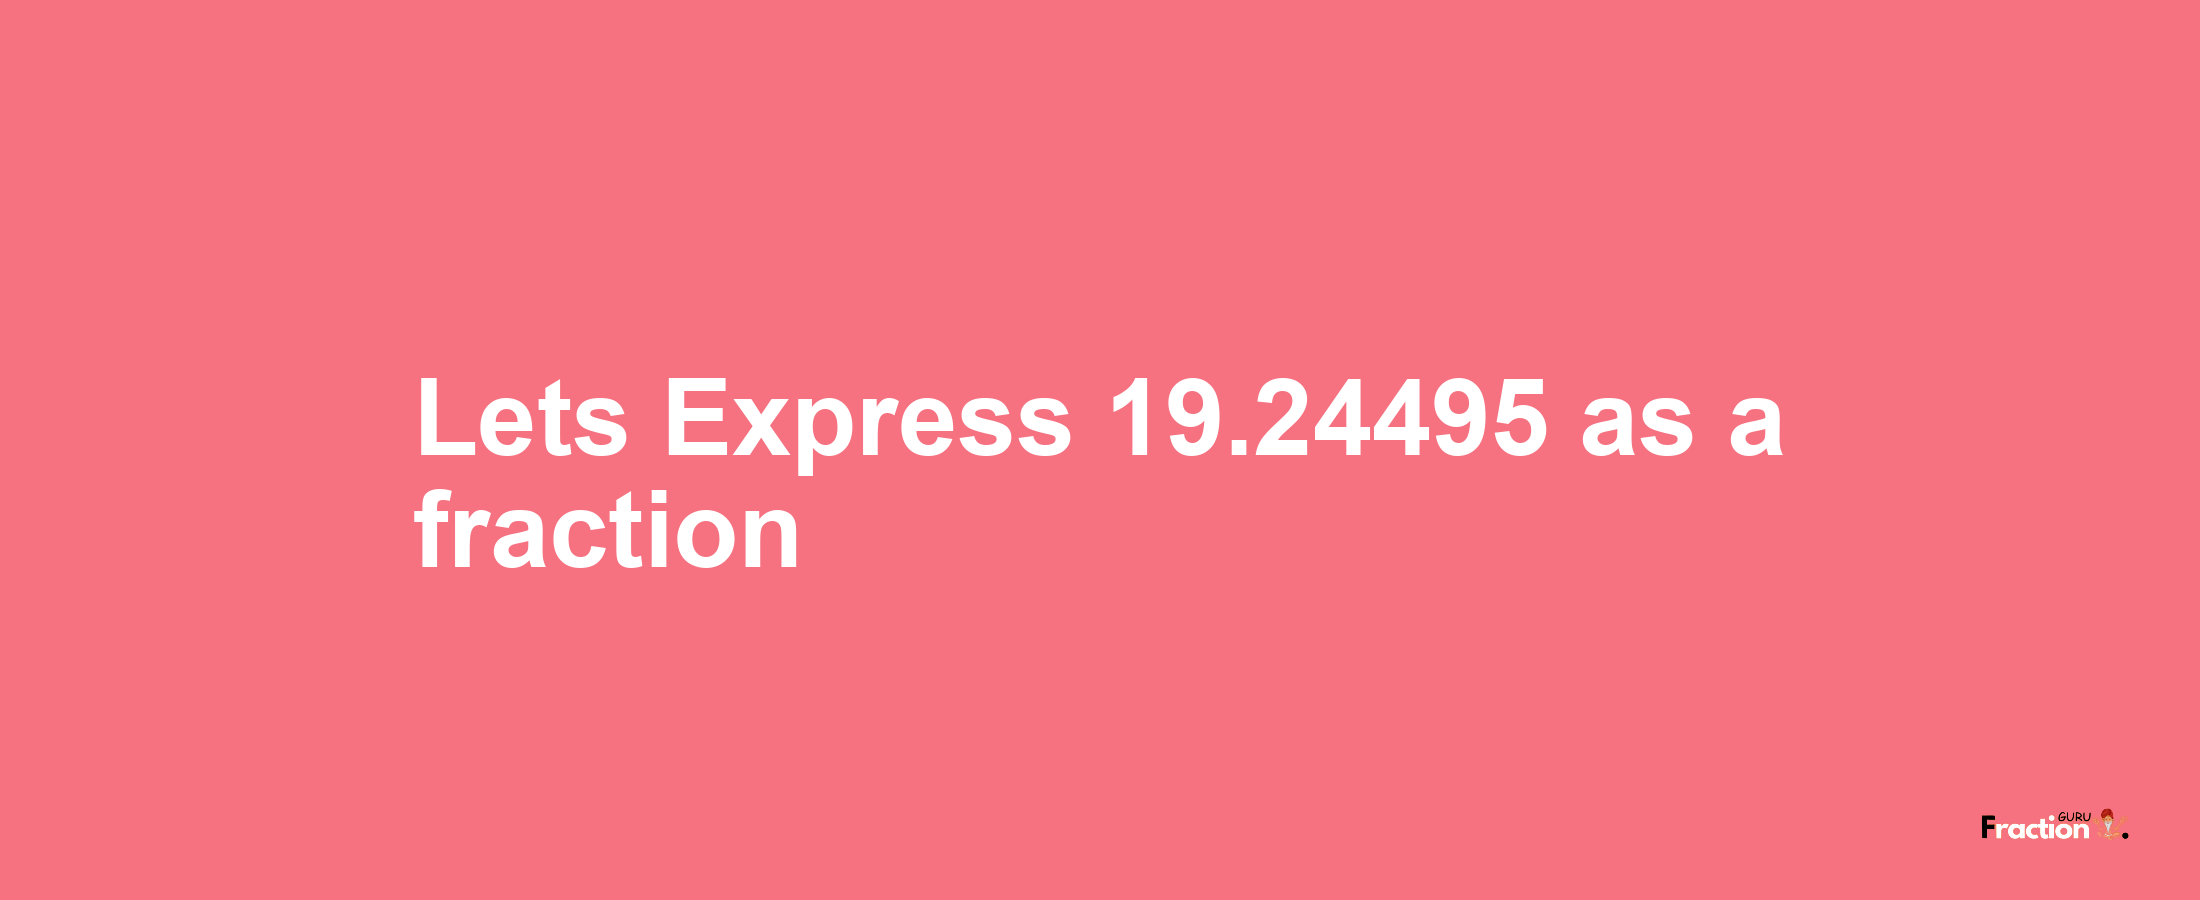 Lets Express 19.24495 as afraction